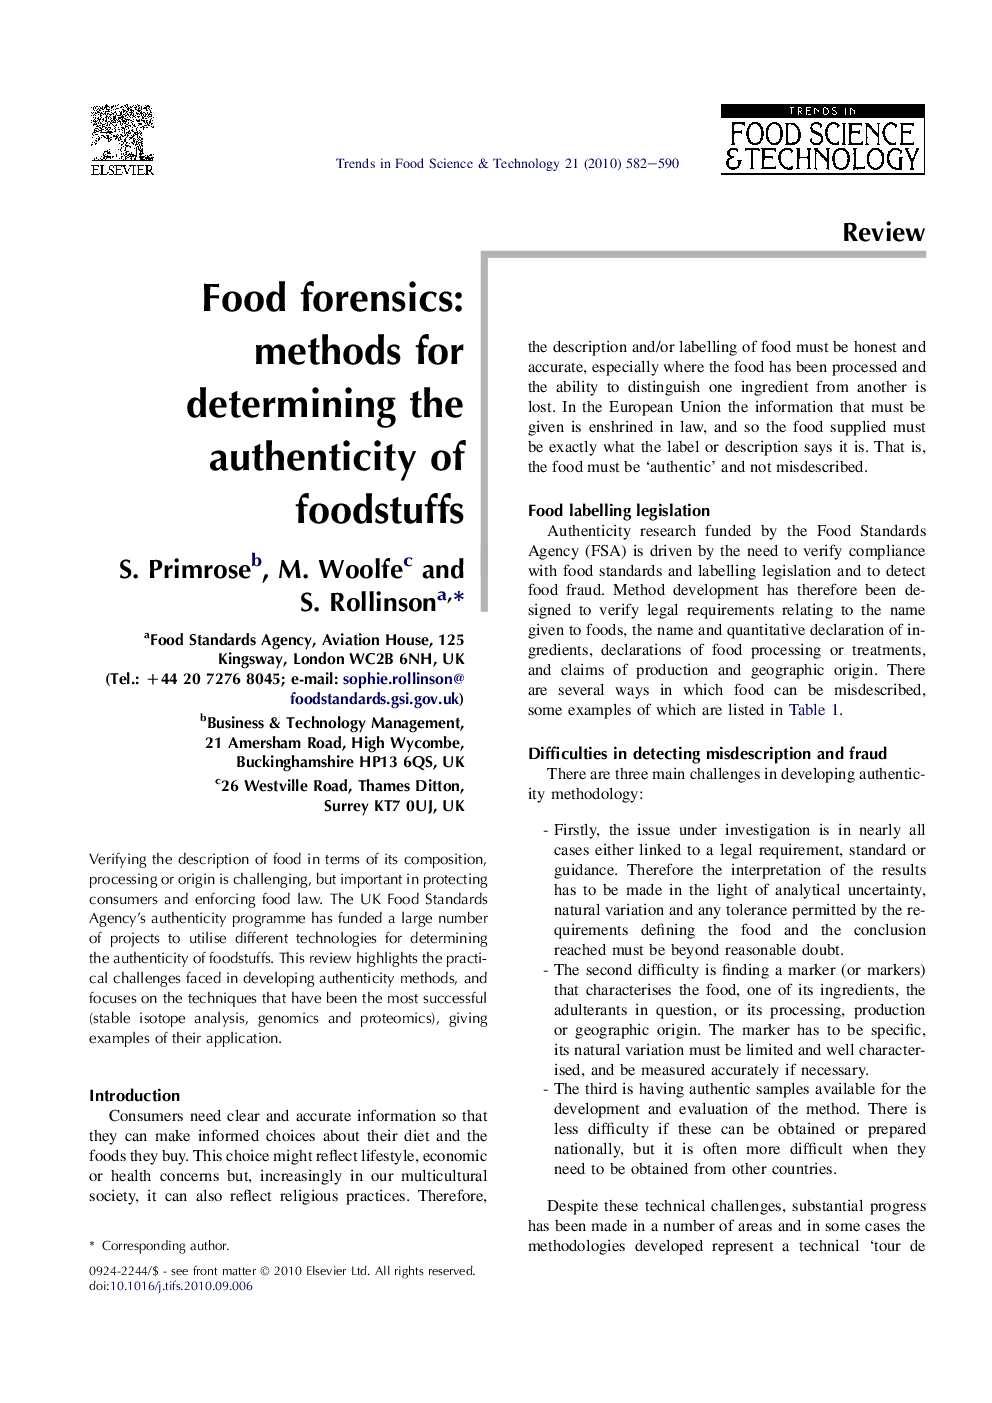 Food forensics: methods for determining the authenticity of foodstuffs